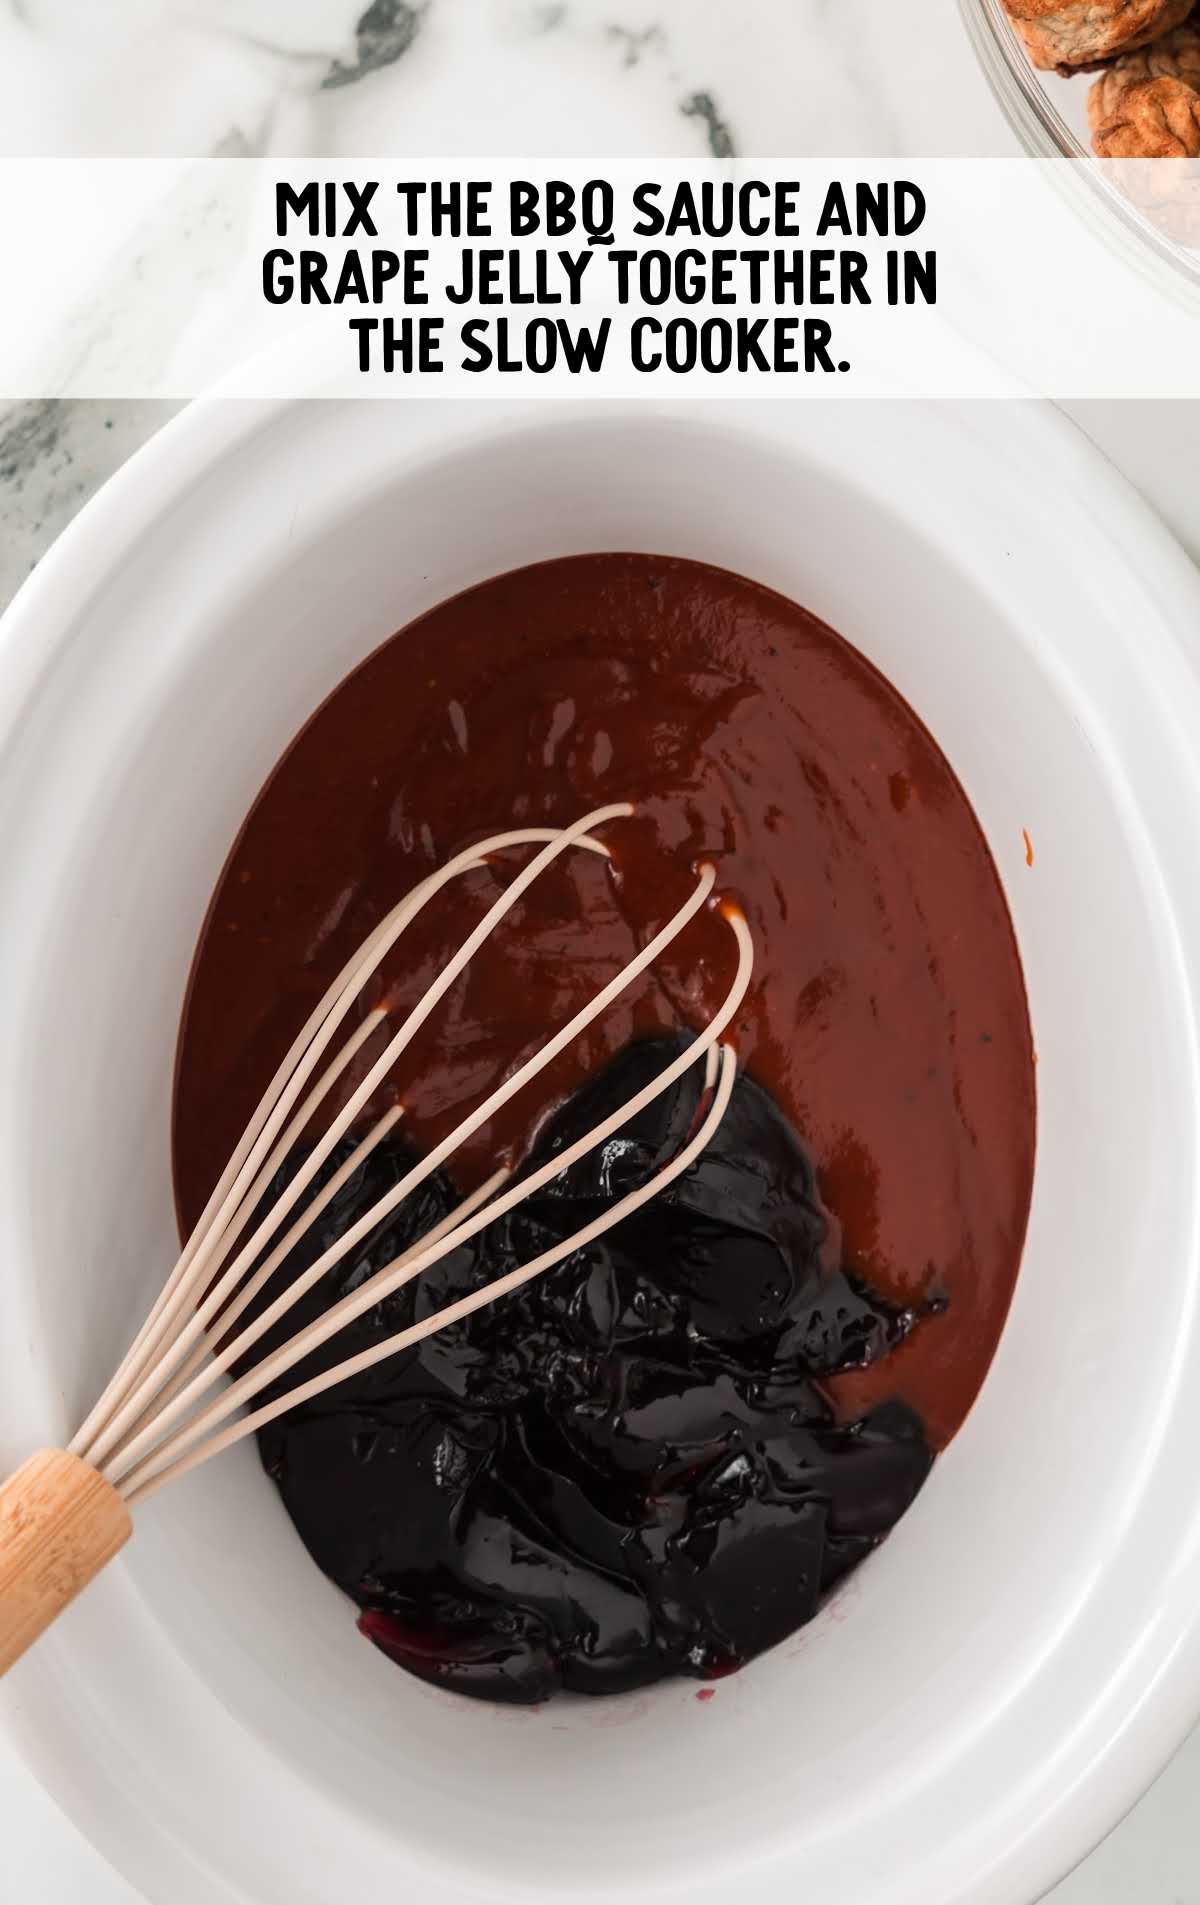 bbq sauce and grape jelly being whisked together in a crockpot